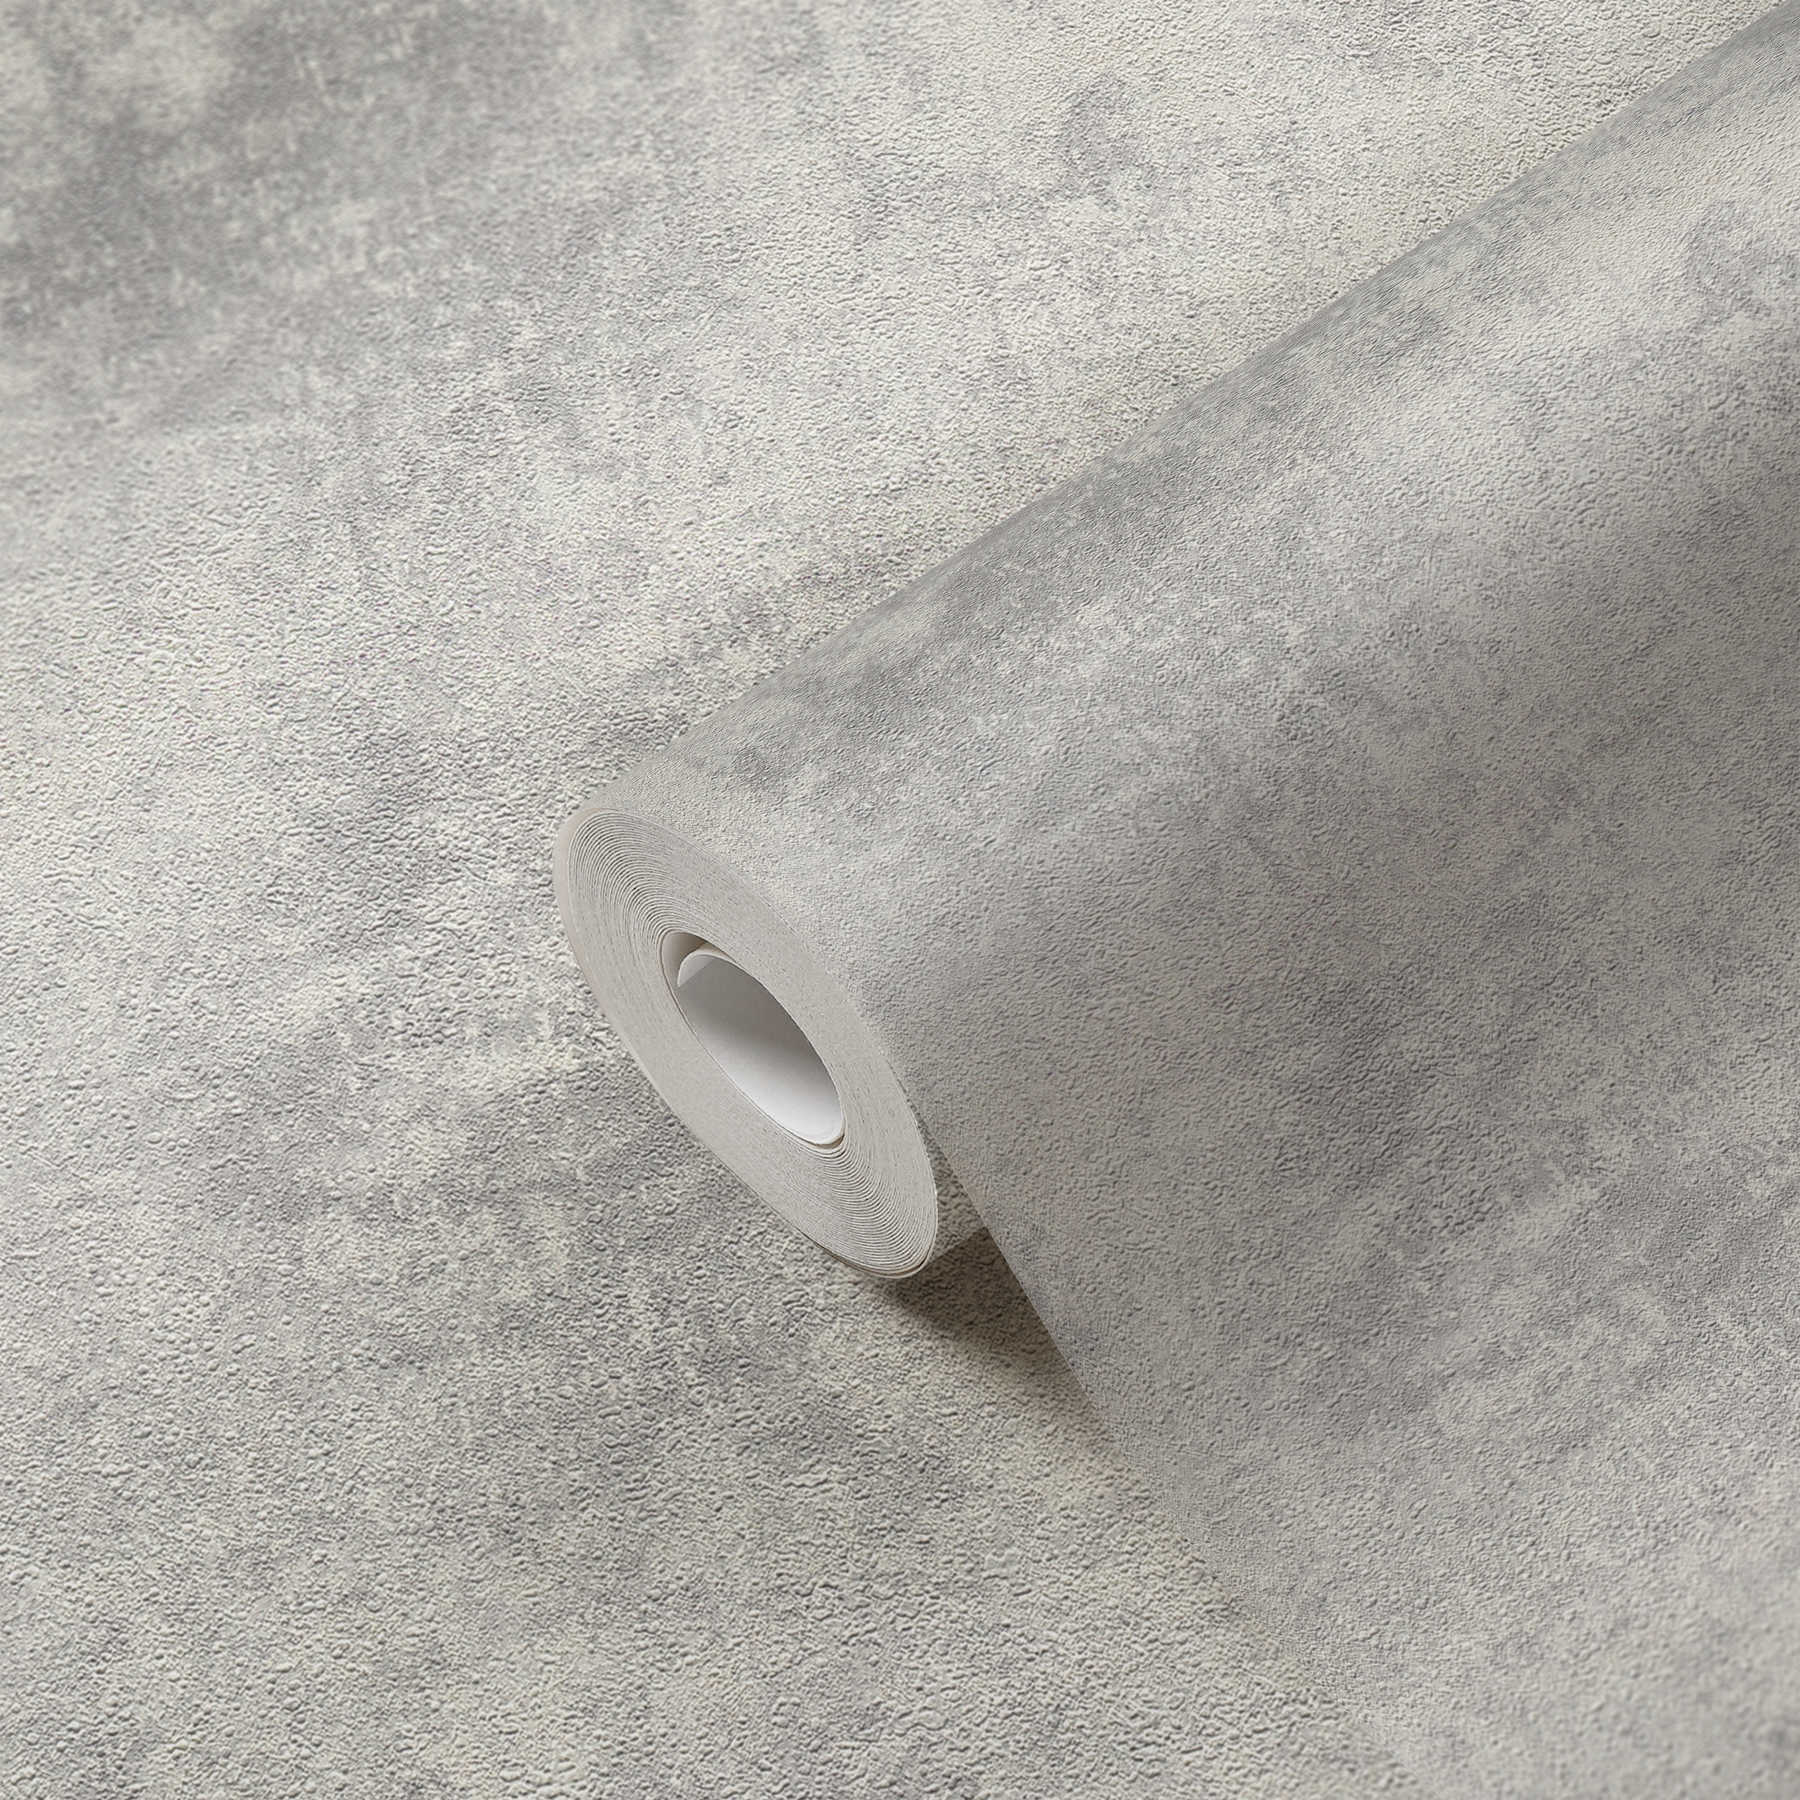             Non-woven wallpaper with disc plaster look & texture pattern - grey, silver
        